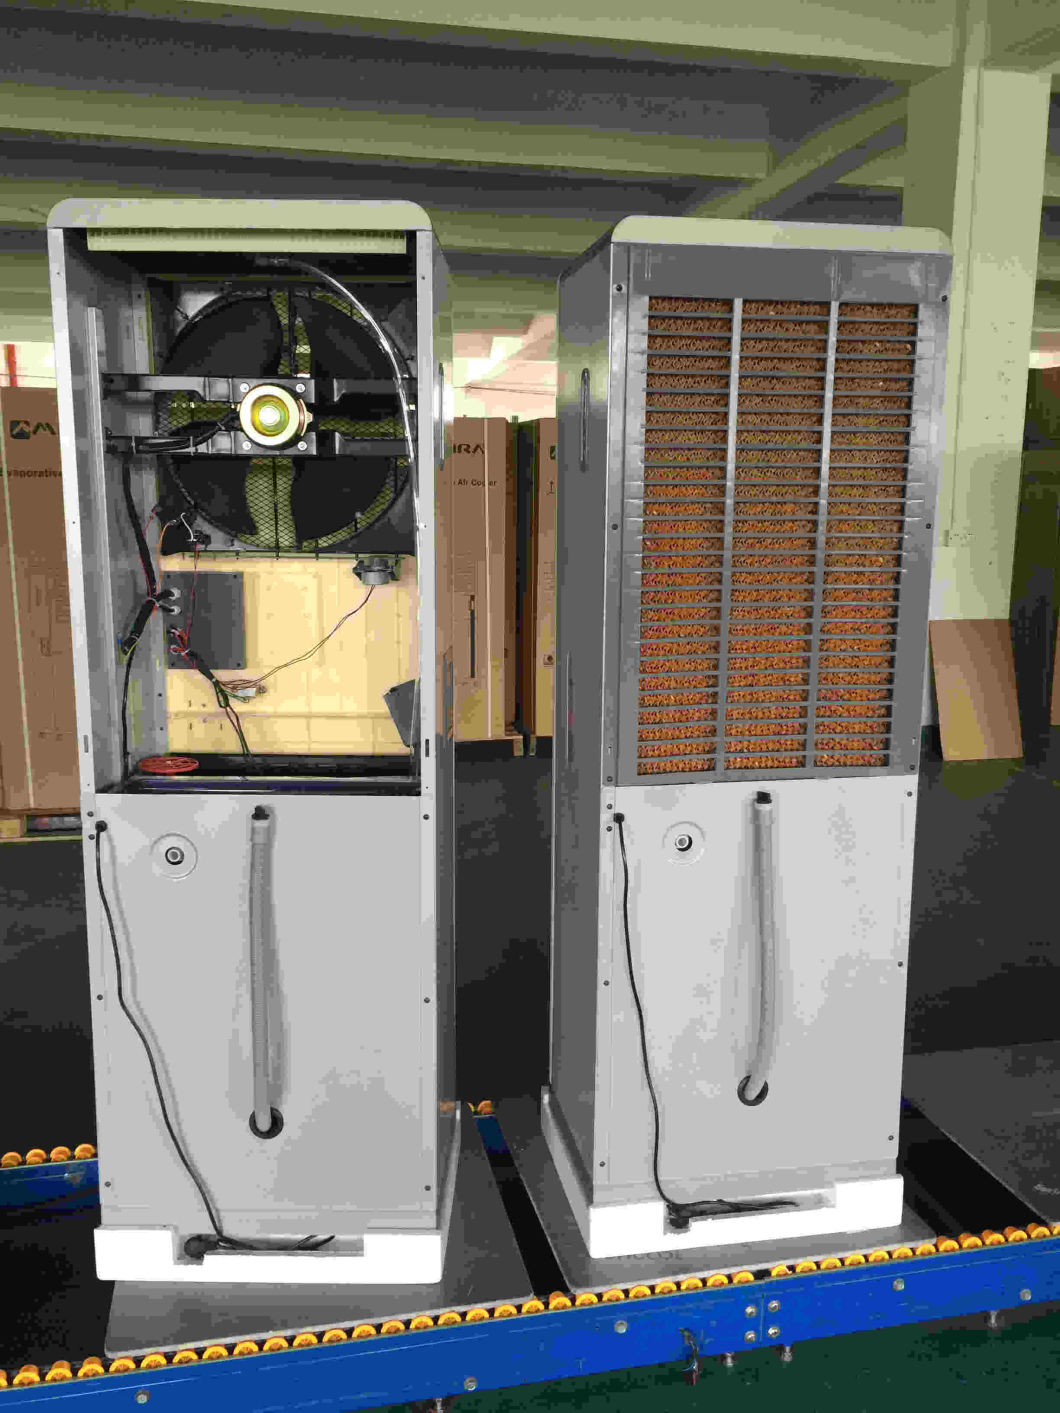 Portable Air Conditioner / Air Conditioning Fan / Room Cooler (JH157)